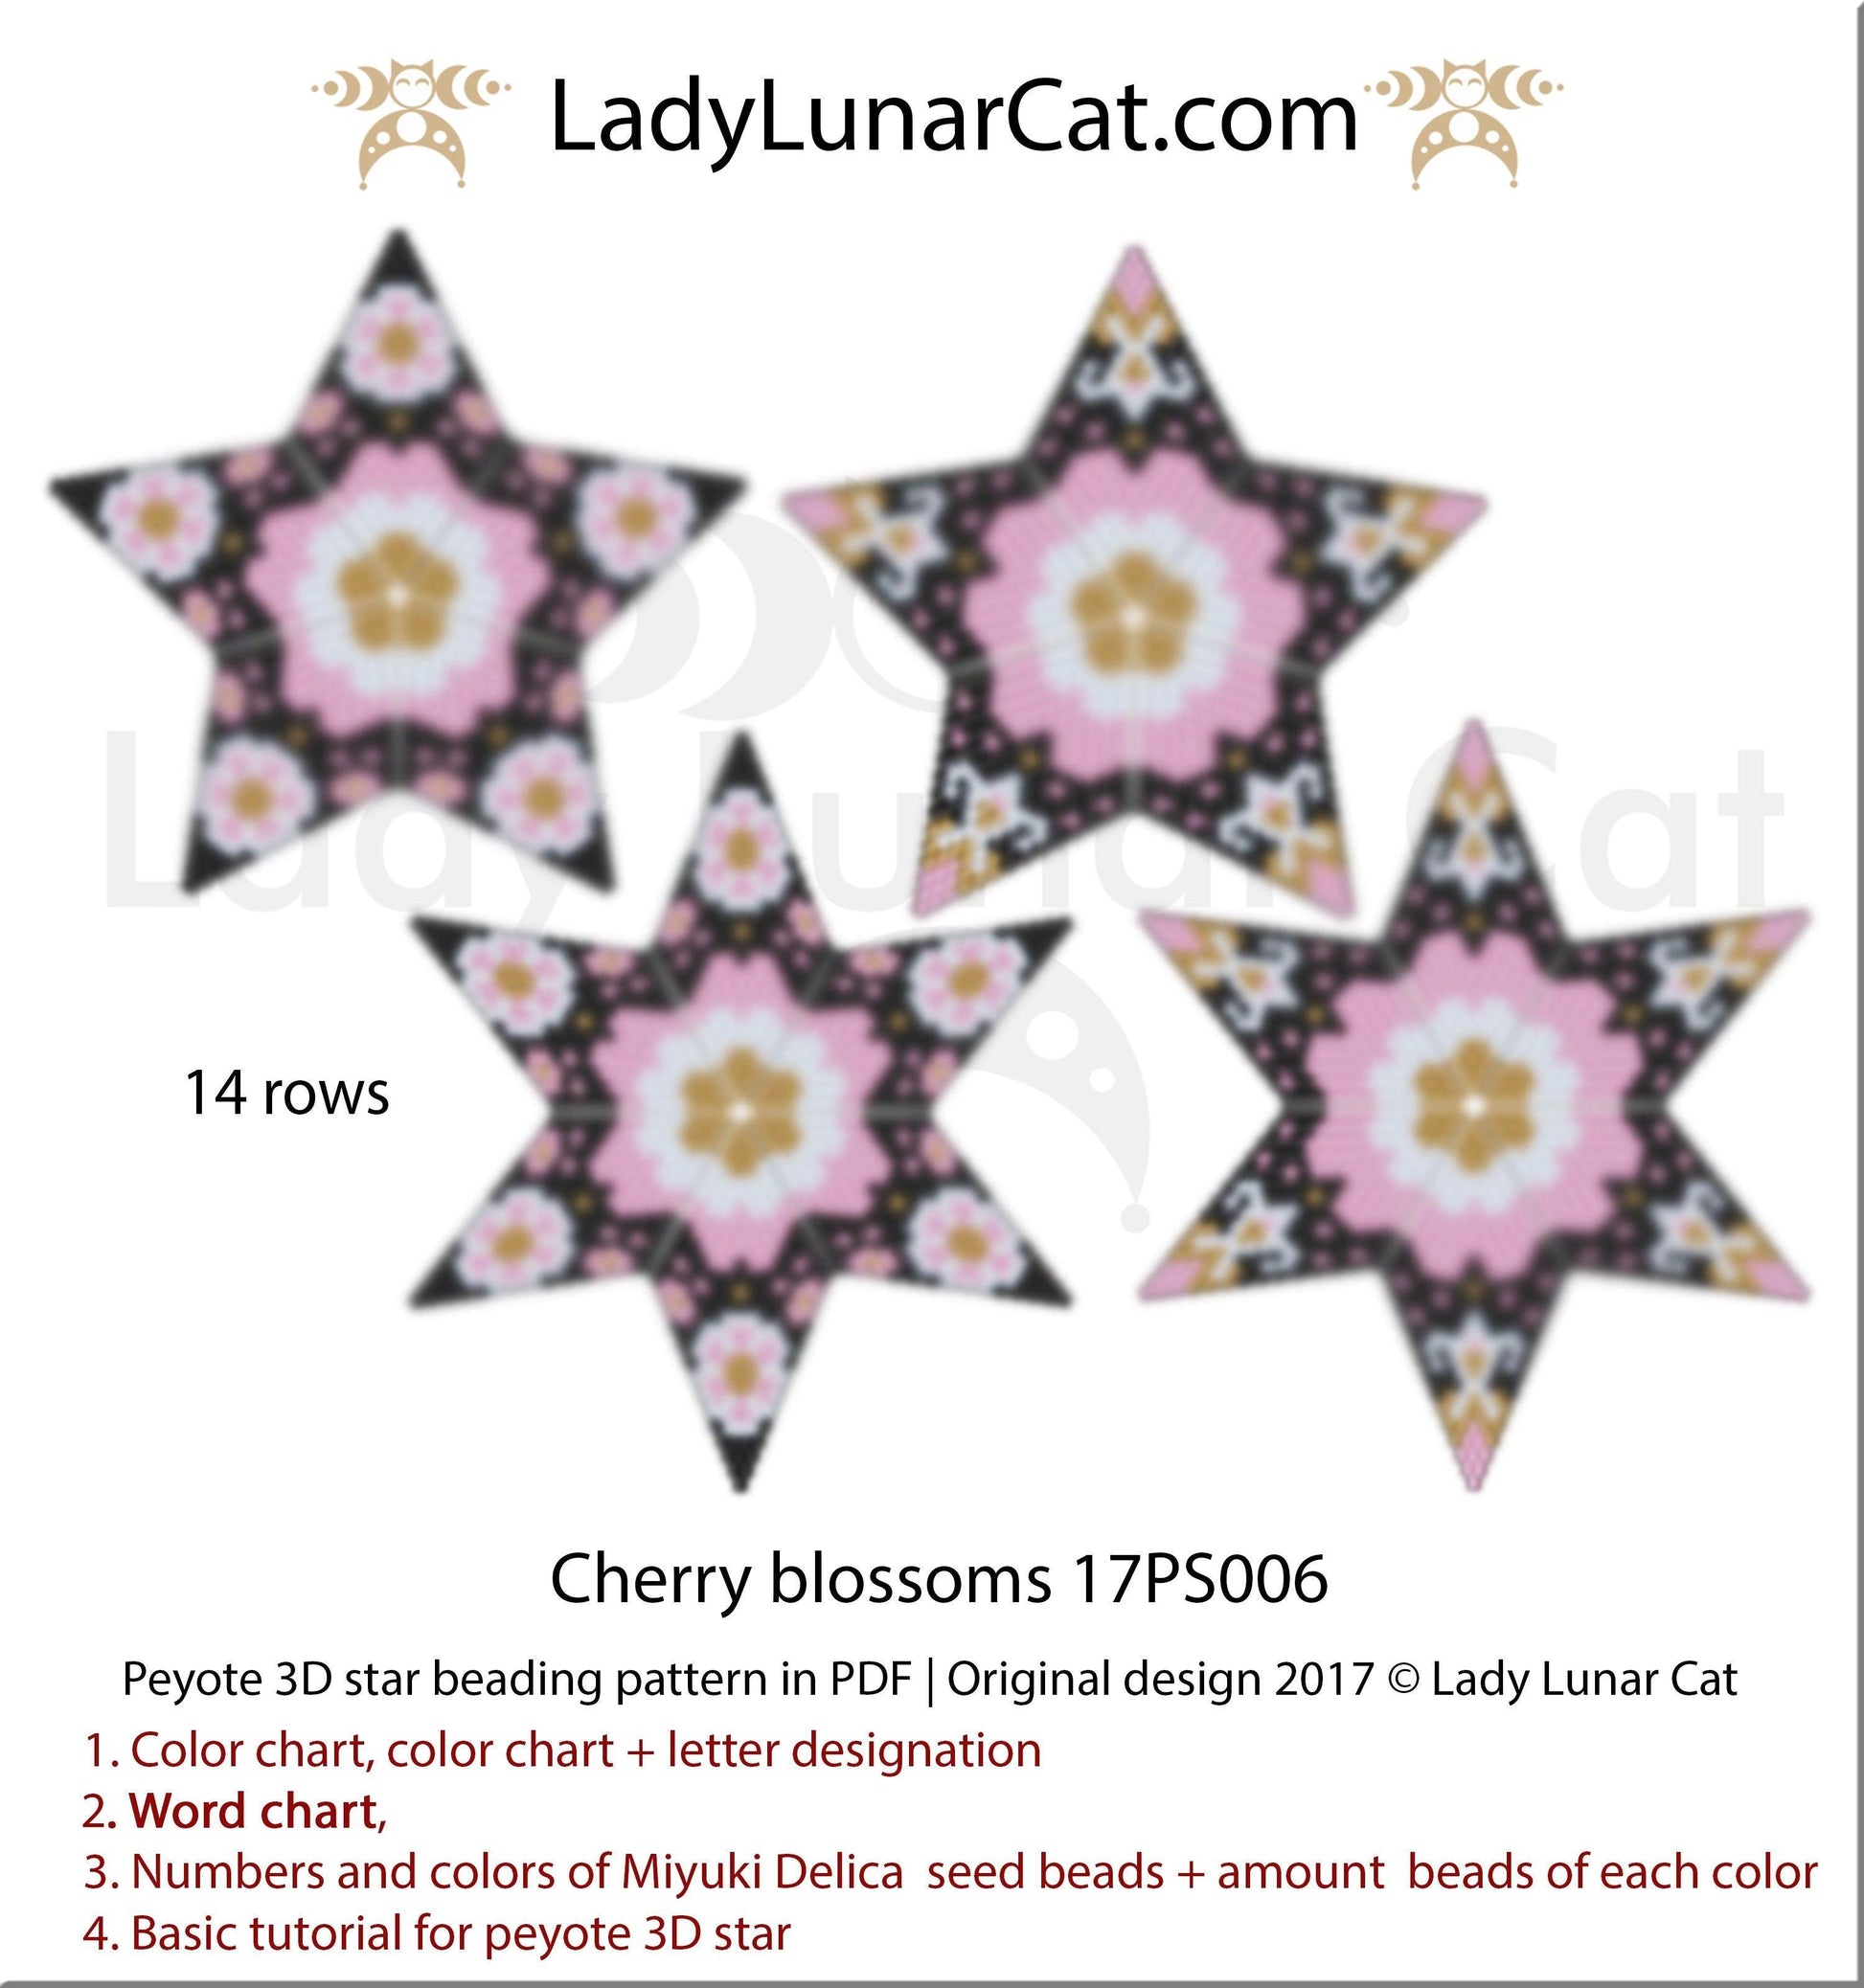 Copy of 3d peyote star patterns for beading Water lilies 20PS010 LadyLunarCat